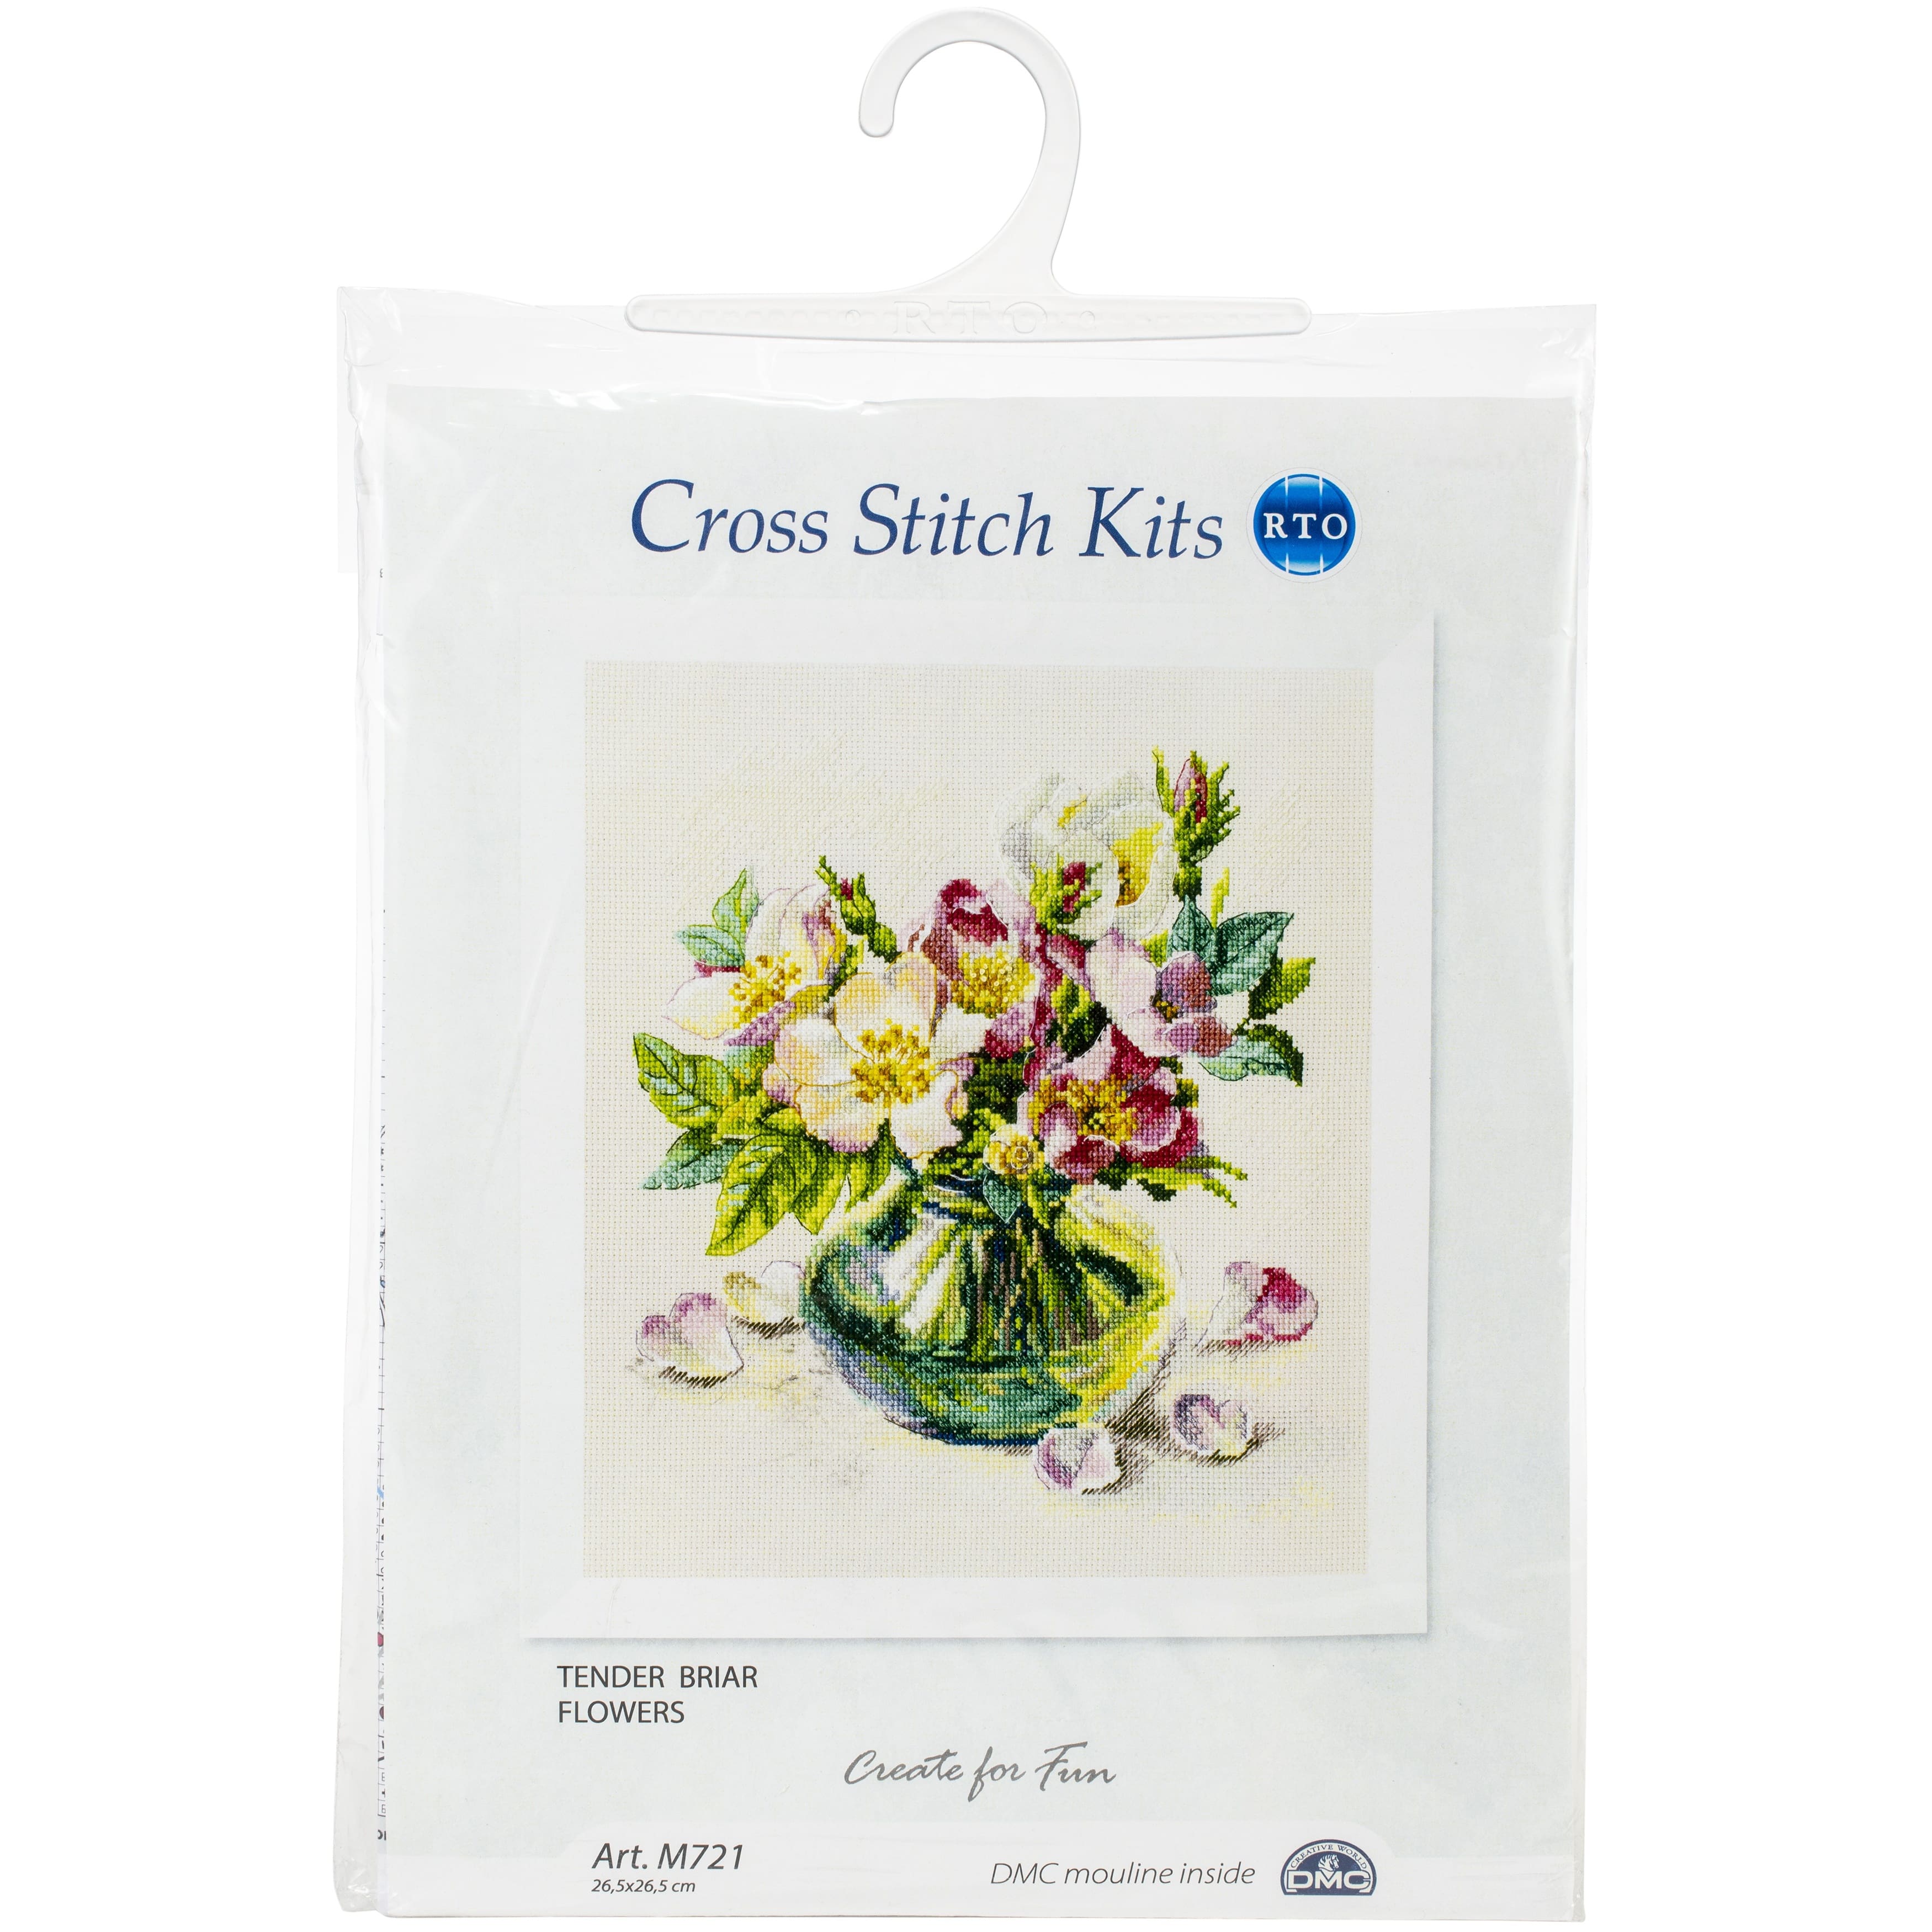 RTO Tender Briar Flowers Counted Cross Stitch Kit